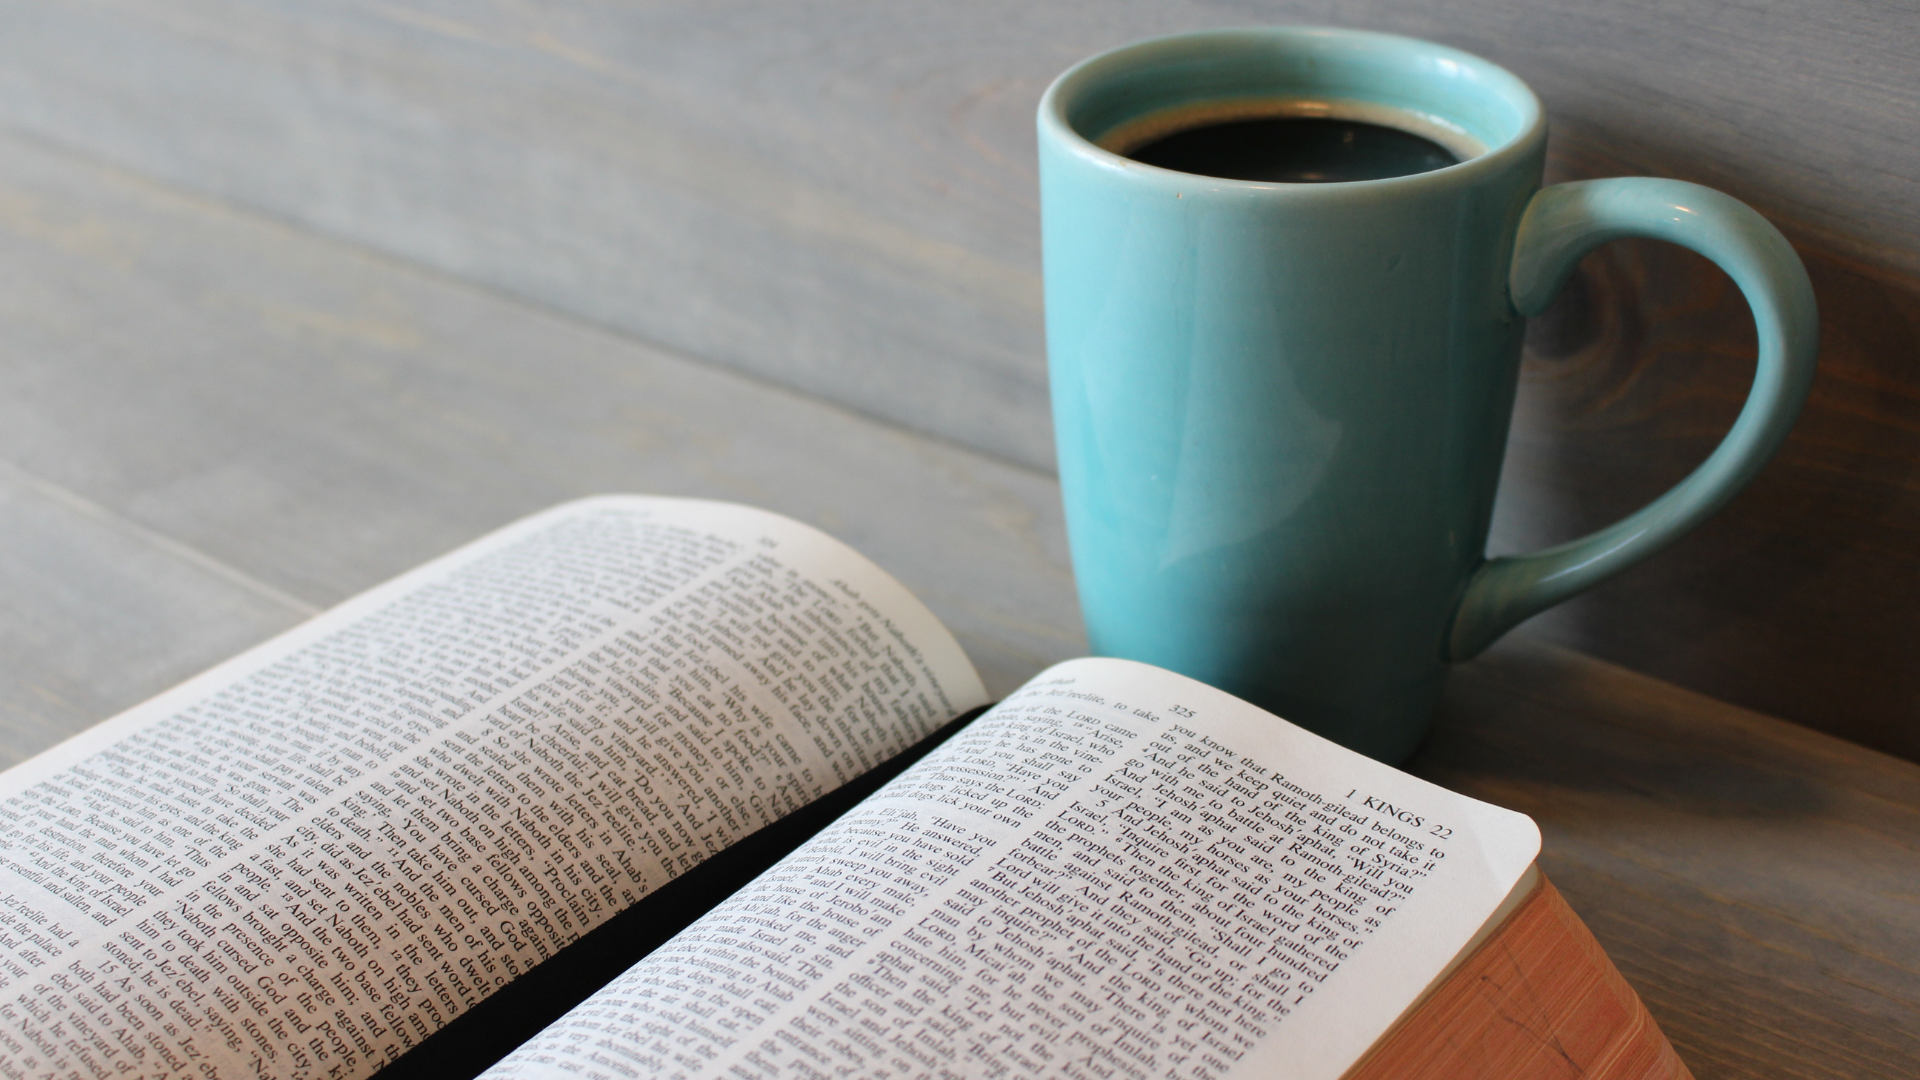 Bible open on table with blue mug of coffee